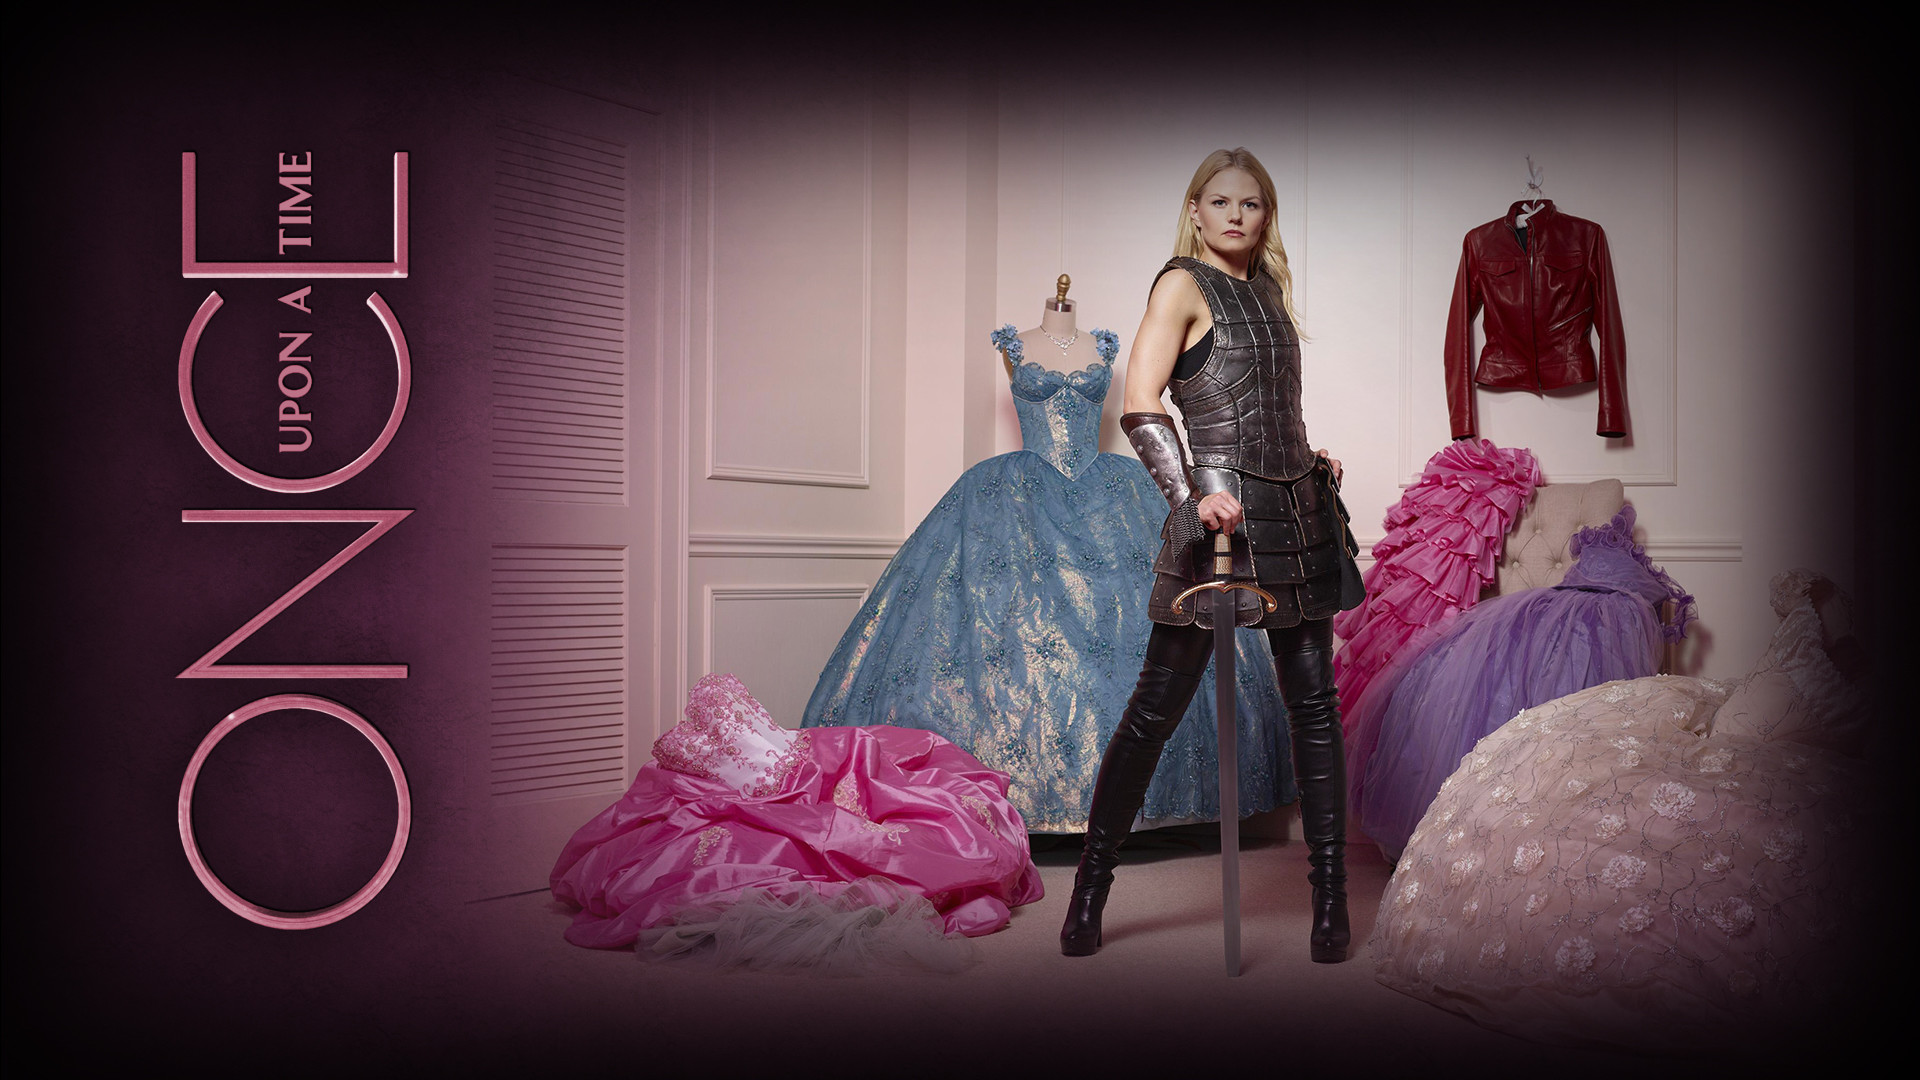 1920x1080 TV Show - Once Upon A Time Wallpaper